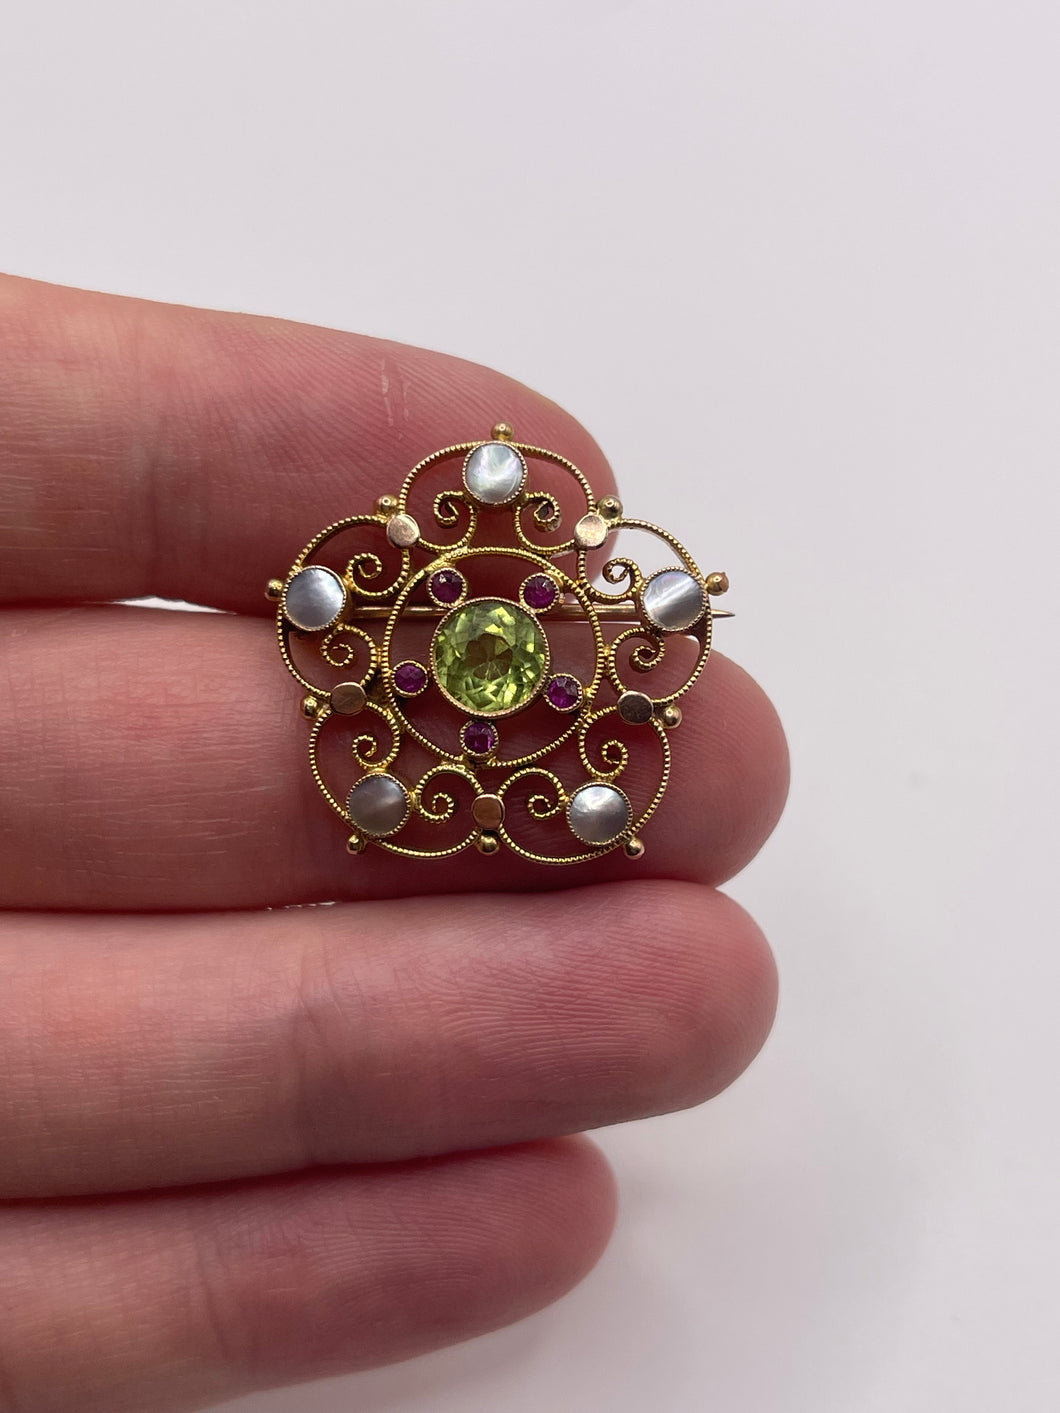 Antique 9ct gold peridot, ruby and pearl brooch by Murrle Bennet